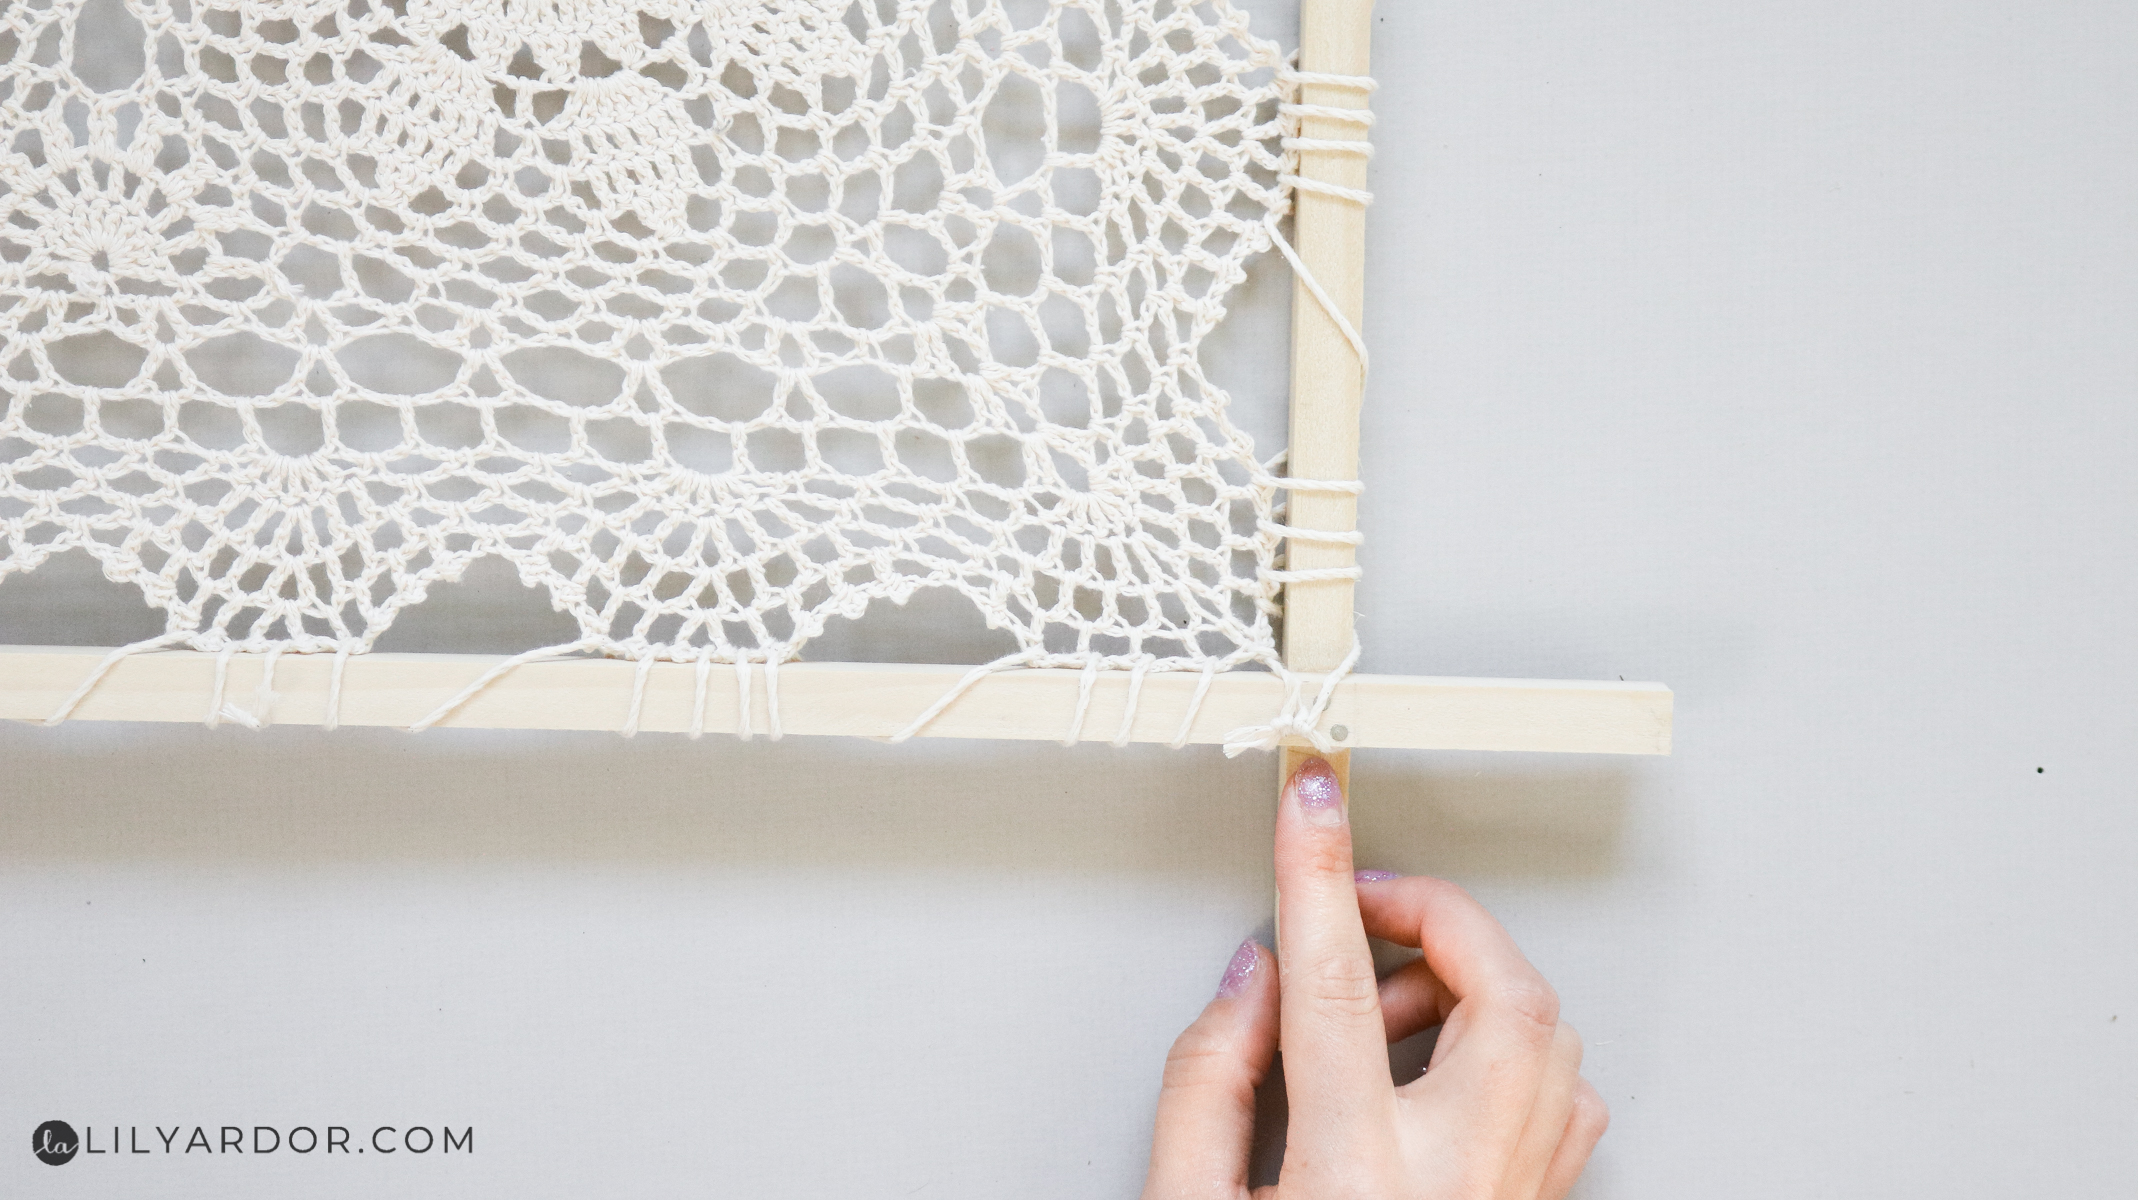 attaching the doily to the frame